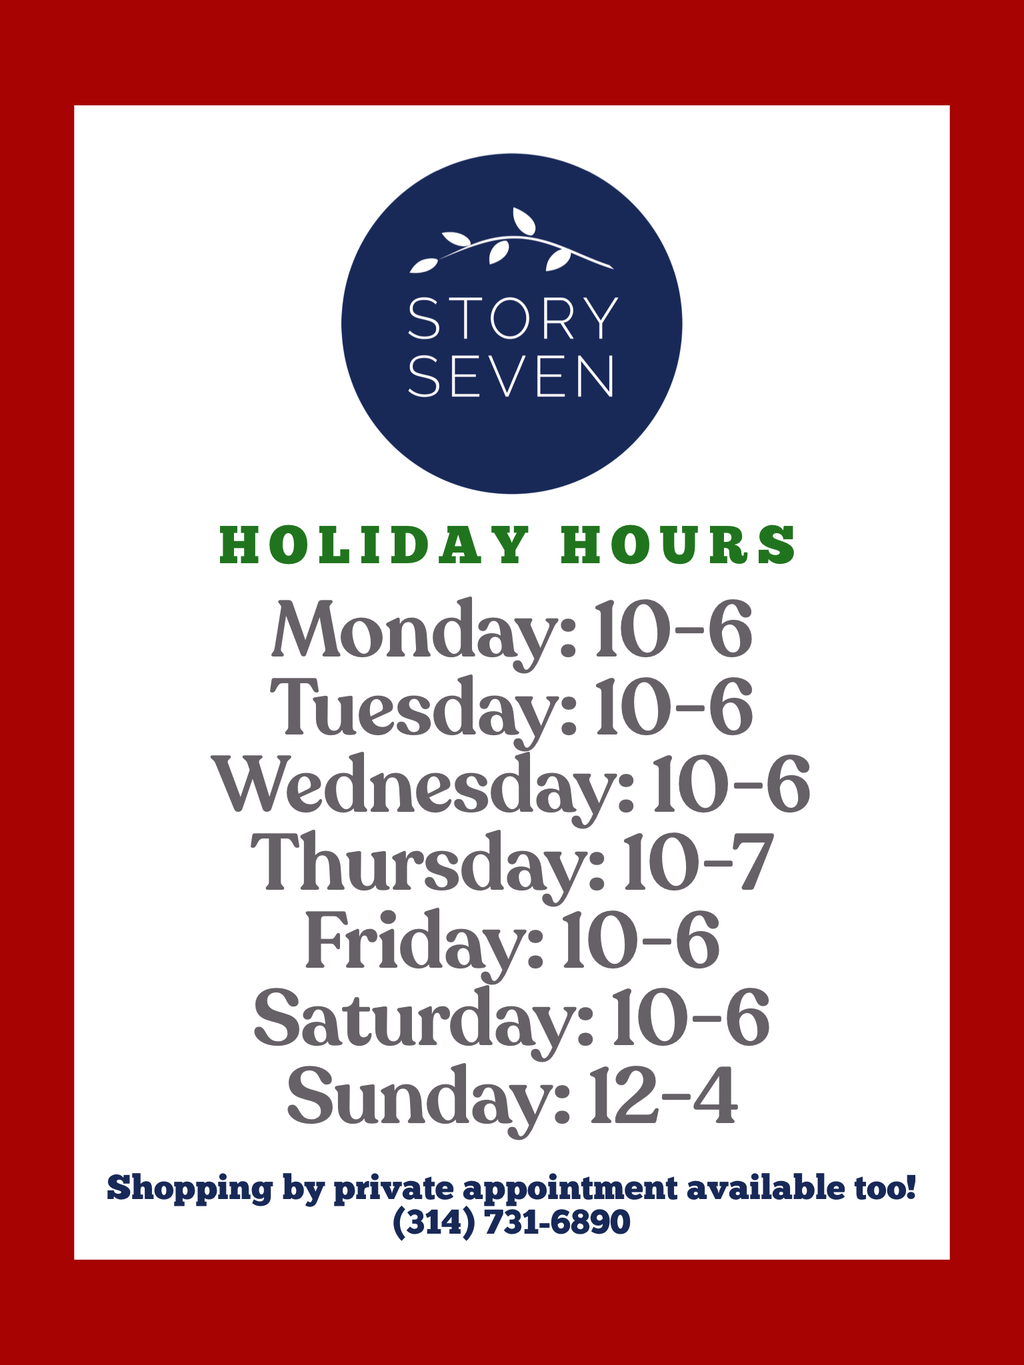 Story Seven Christmas Hours